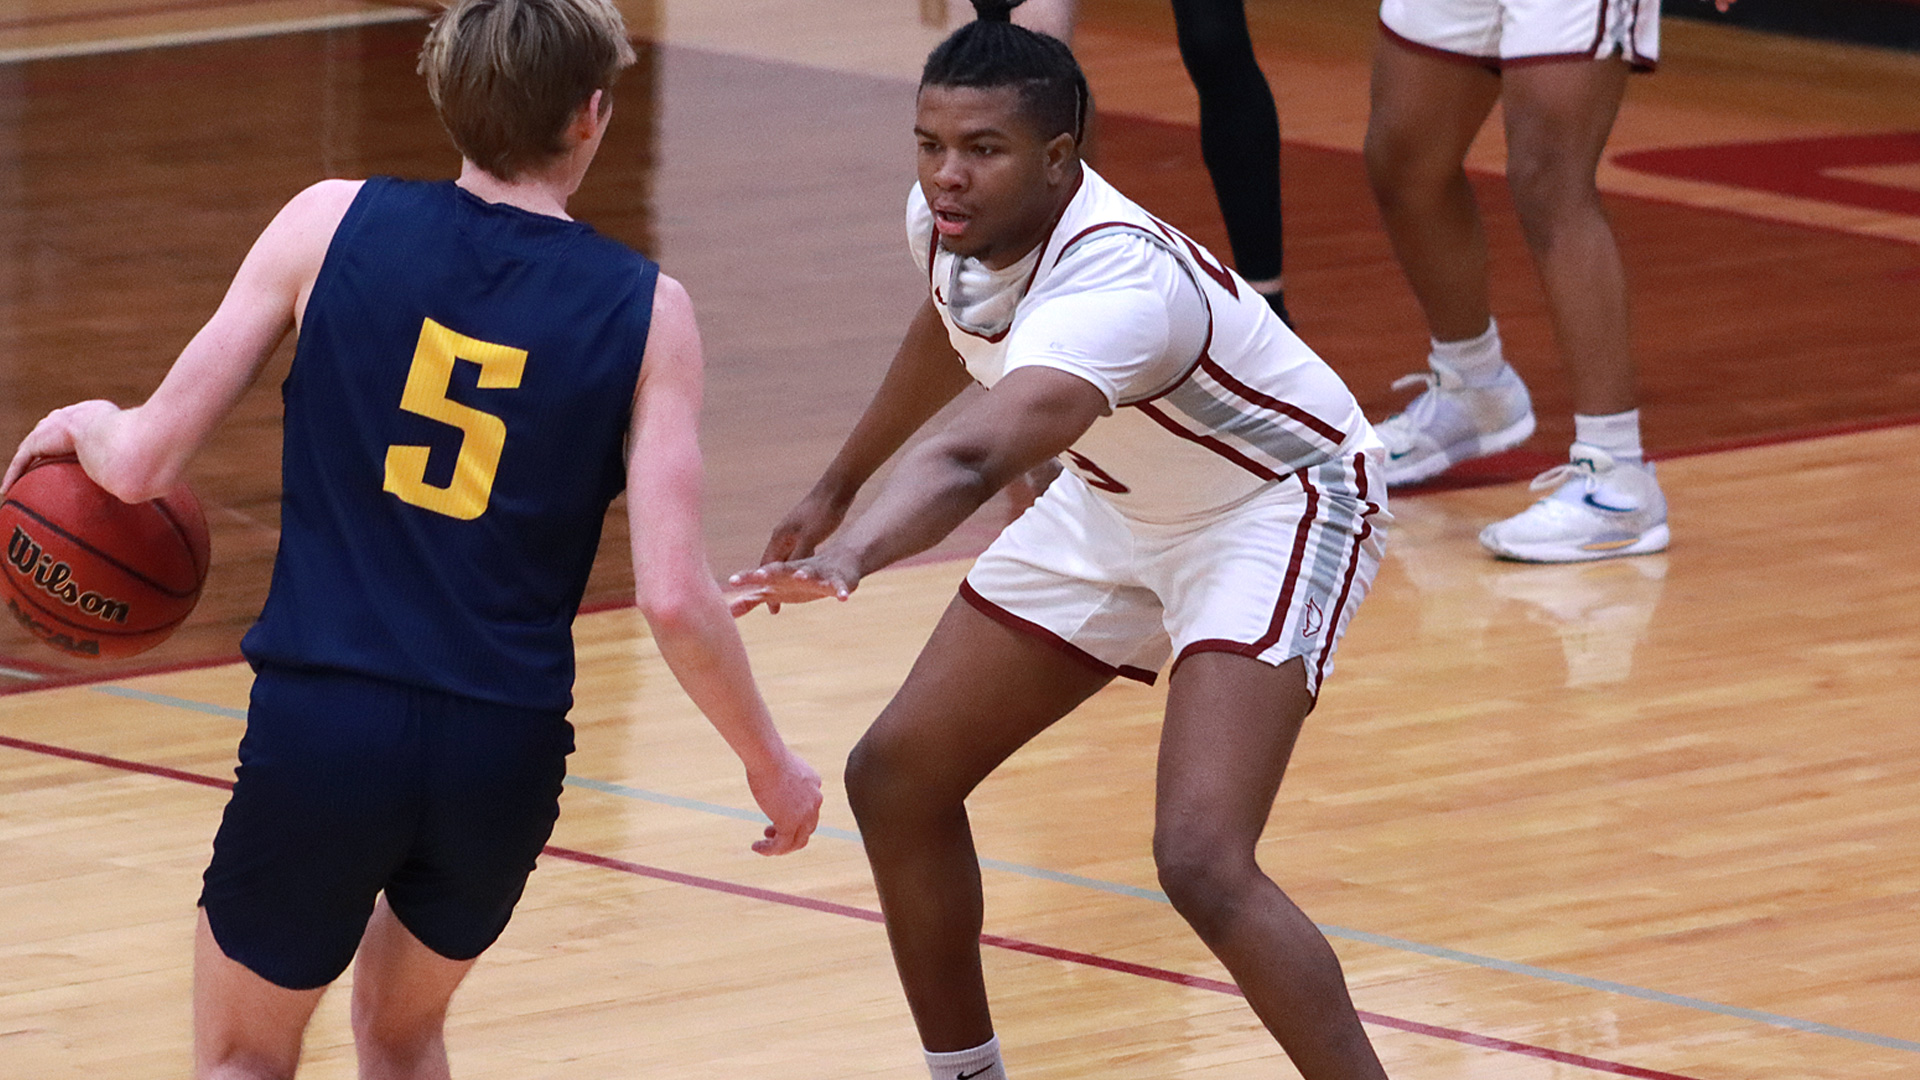 CCCB senior Andrew Johnson scored four points and grabbed five rebounds during the Saints' 83-65 win over Spurgeon College on Tuesday.